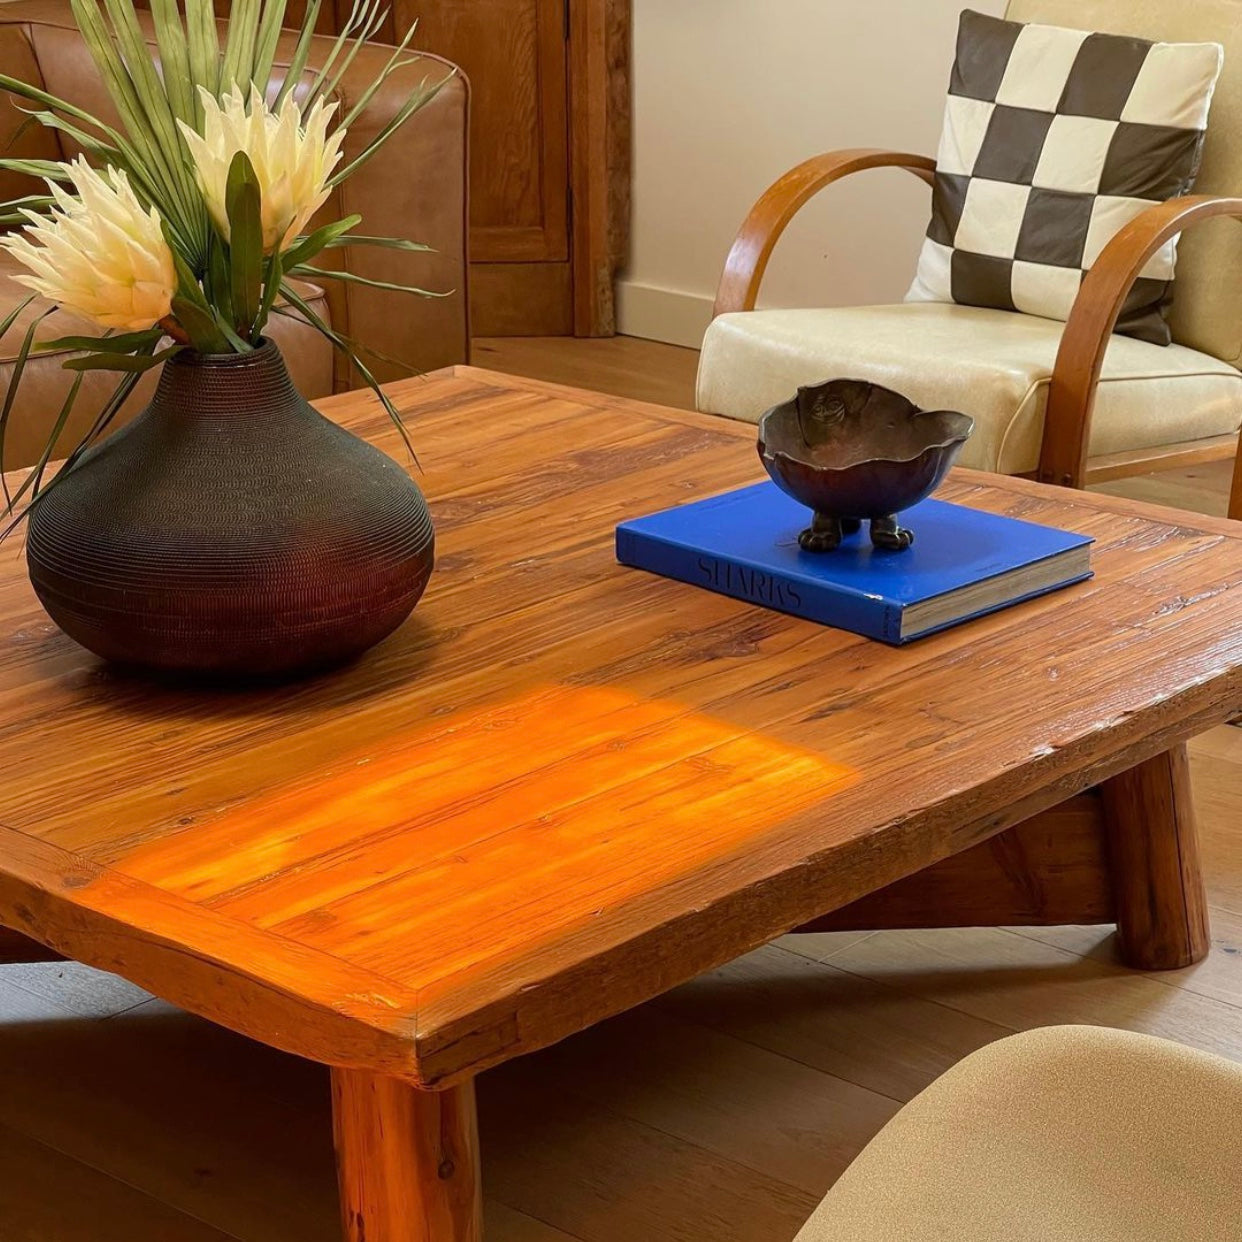 Square wood coffee table with a blue book